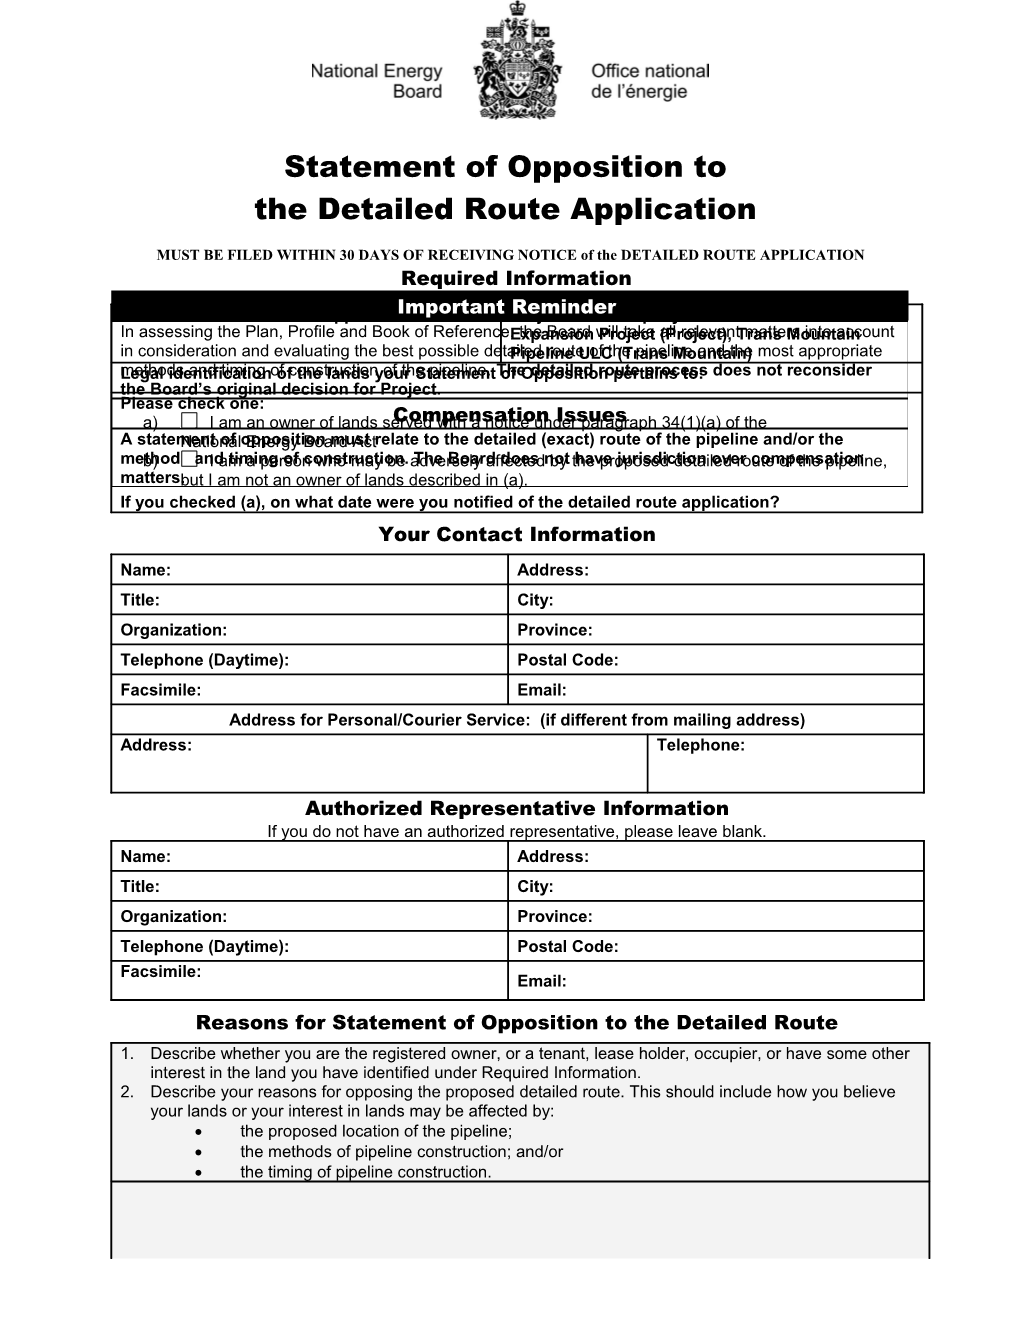 MUST BE FILED WITHIN 30 DAYS of RECEIVING NOTICE of the DETAILED ROUTE APPLICATION